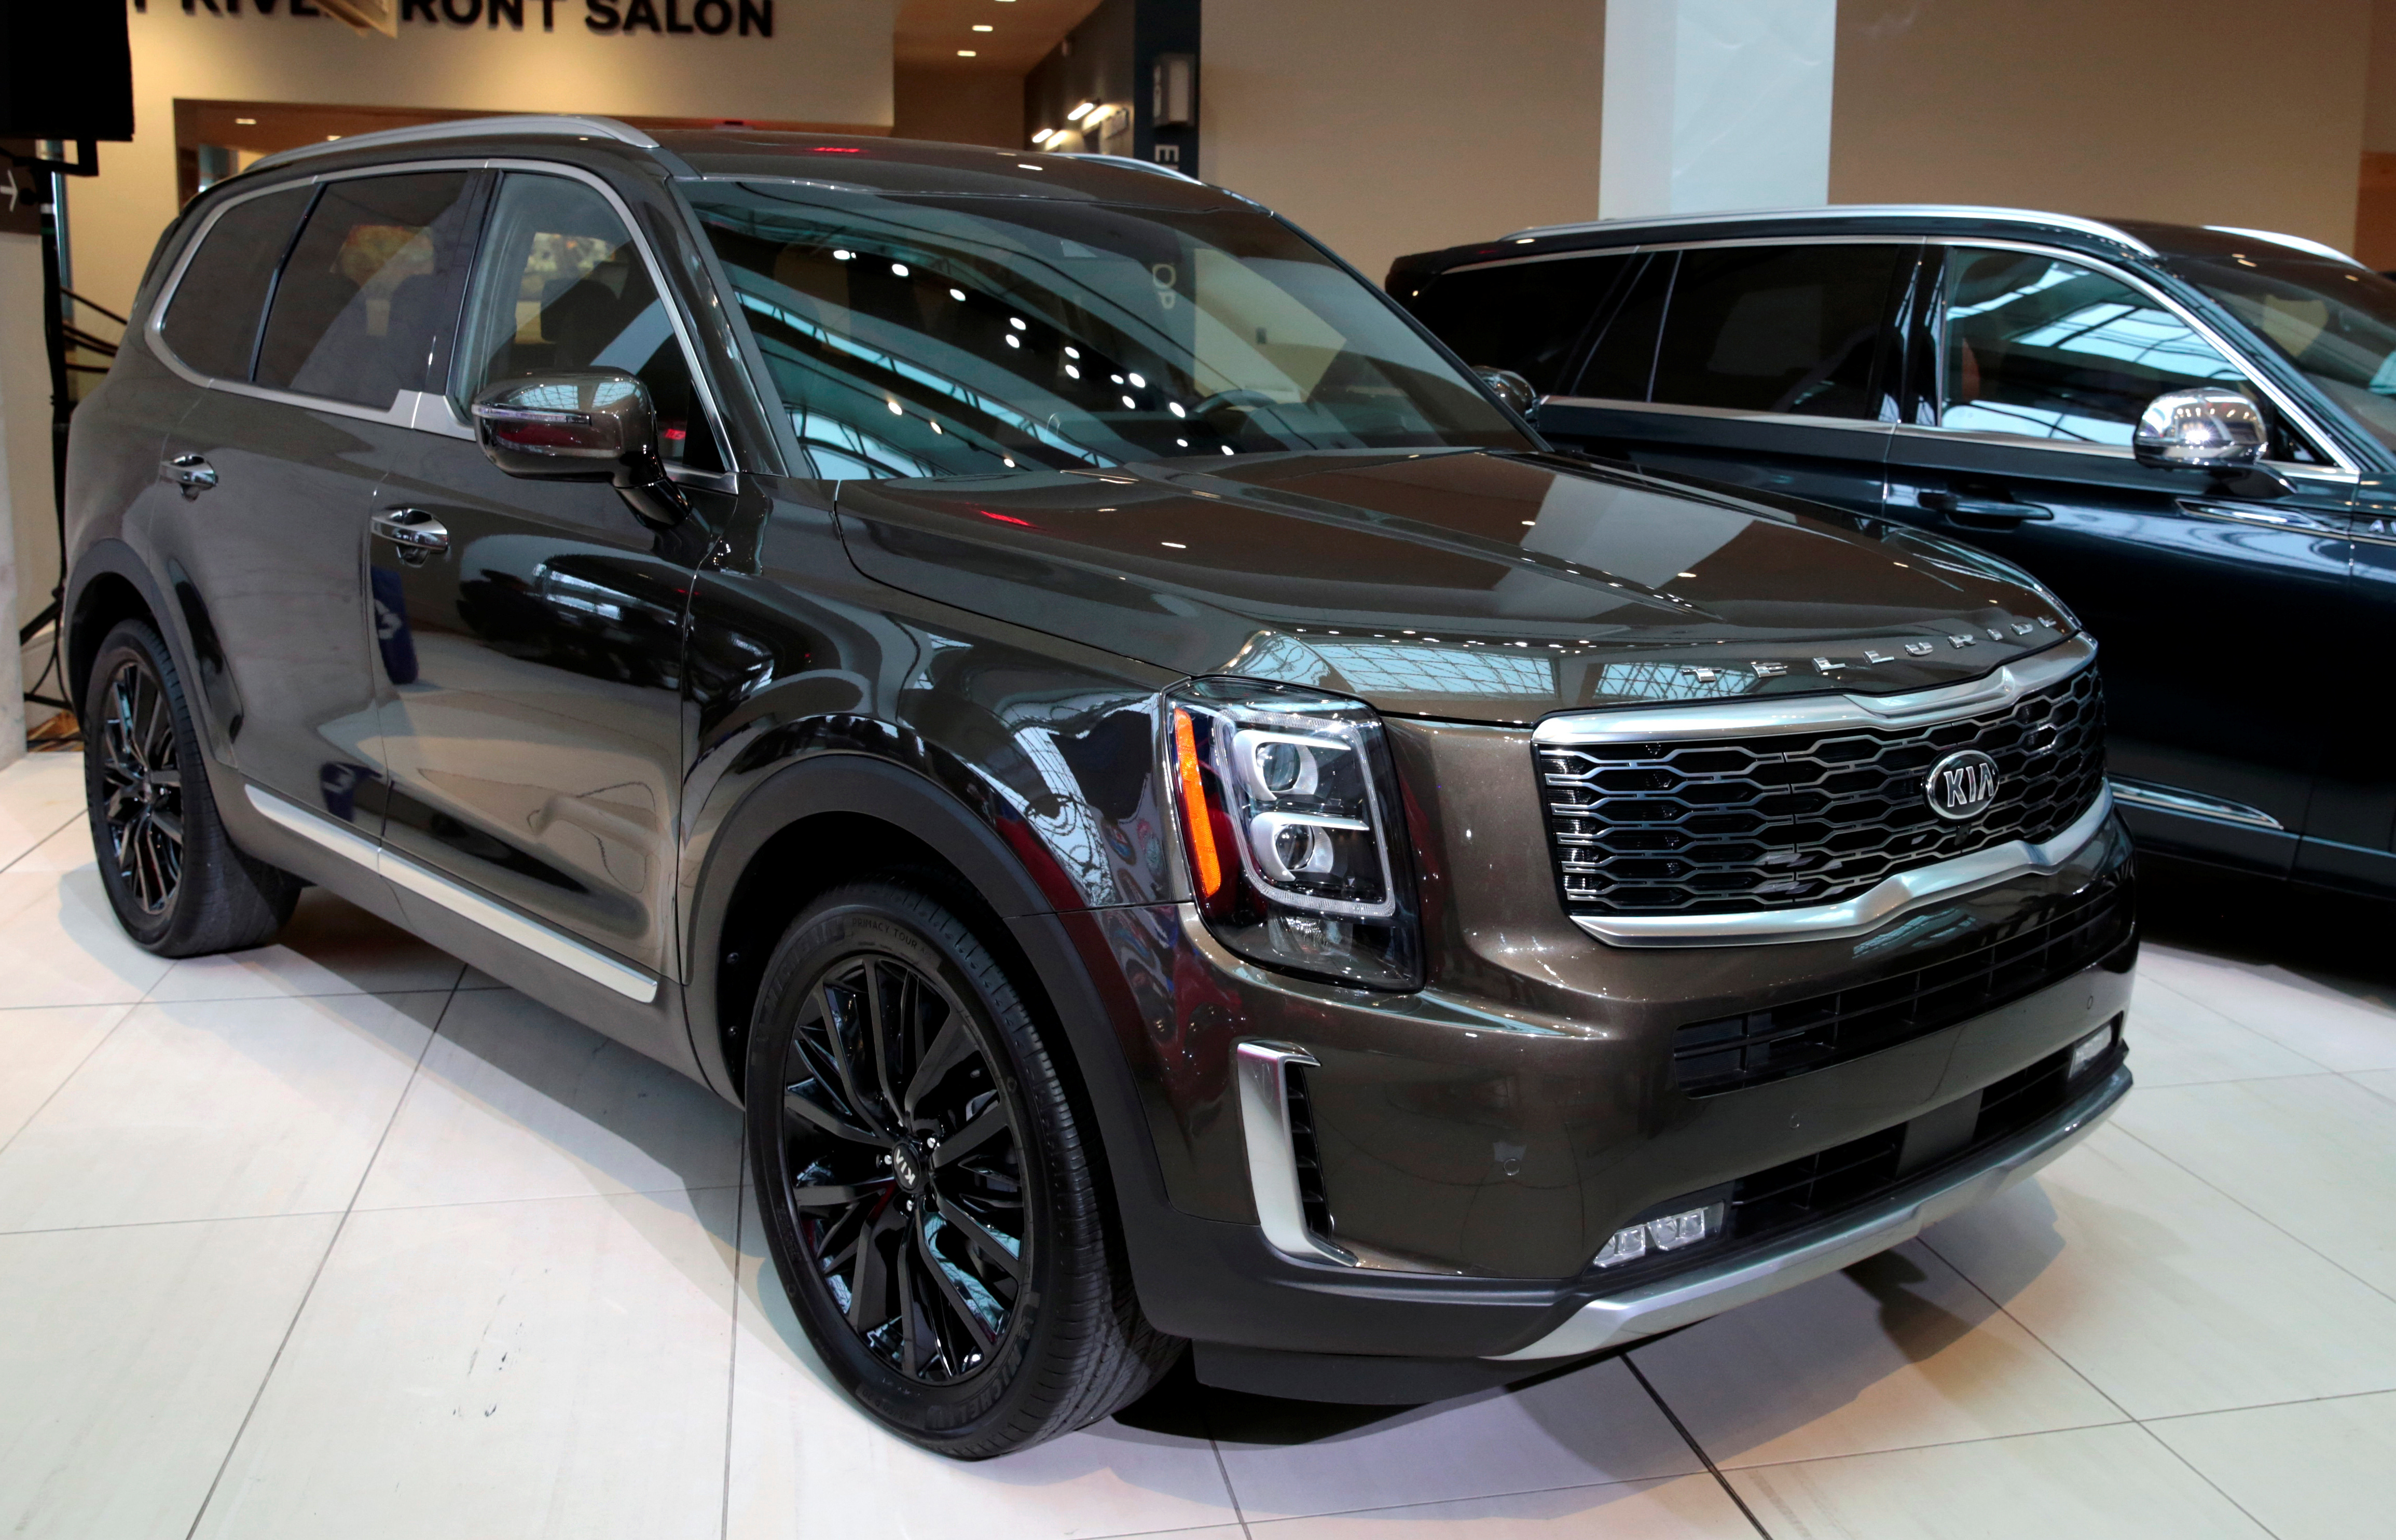 The Kia Motors 2020 Telluride vehicle is displayed during the award ceremony winning the 